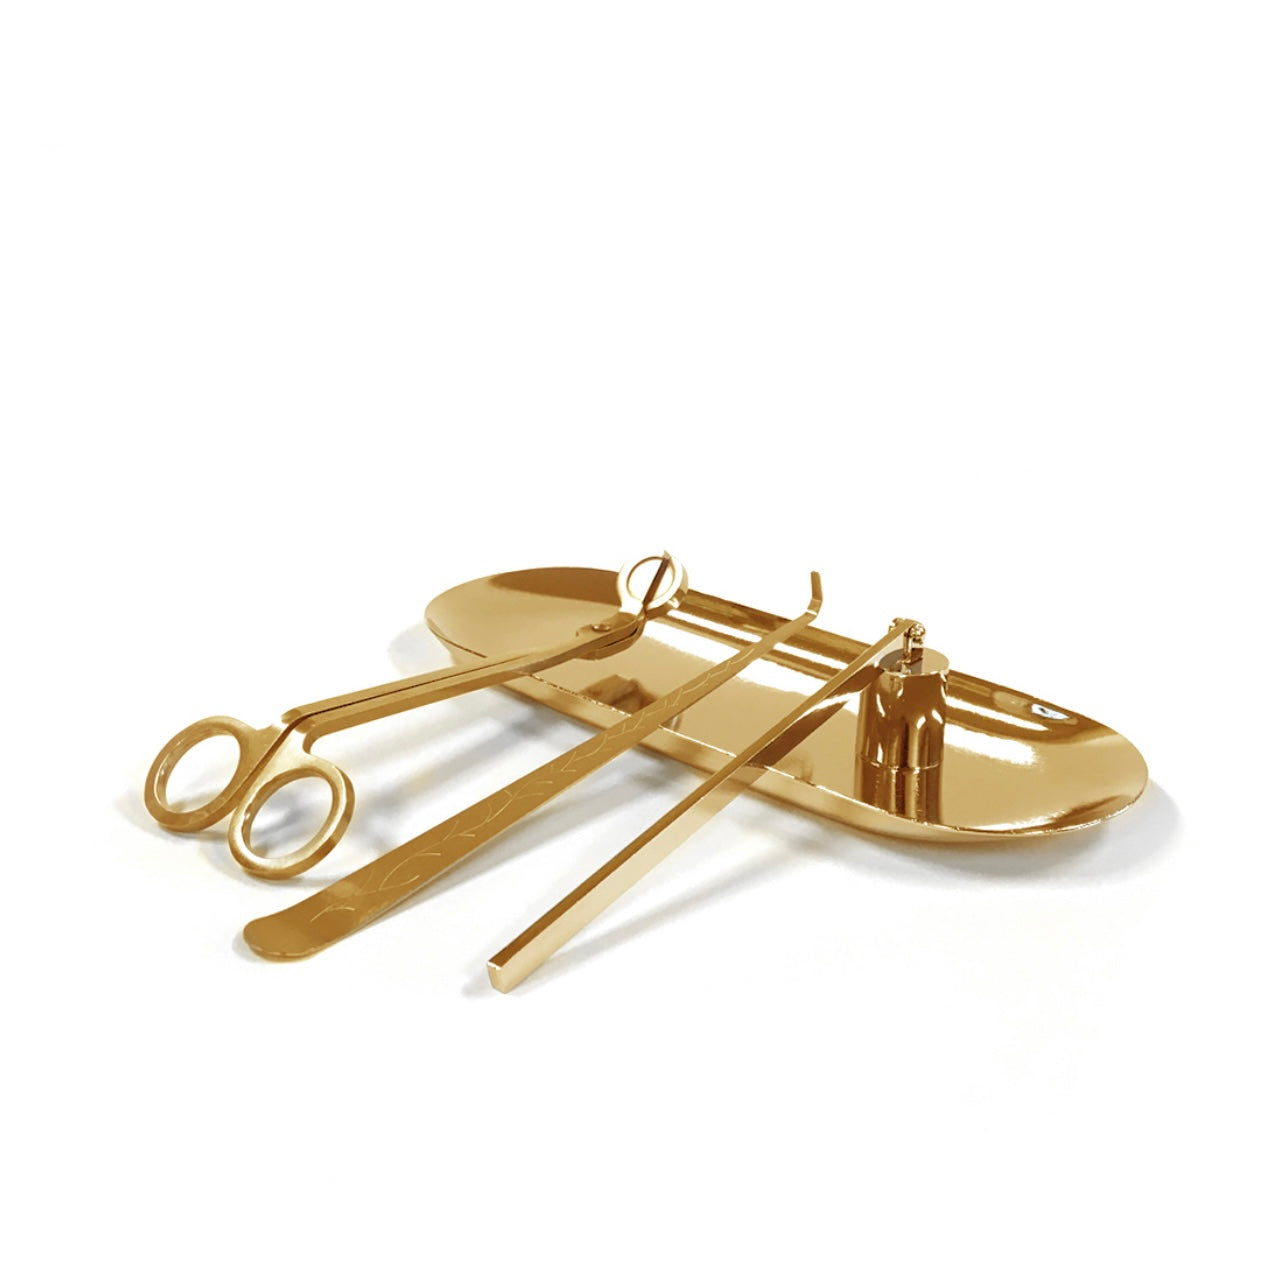 Gold Candle care set includes wick trimmer candle dipper and wick trimmer plus a tray.